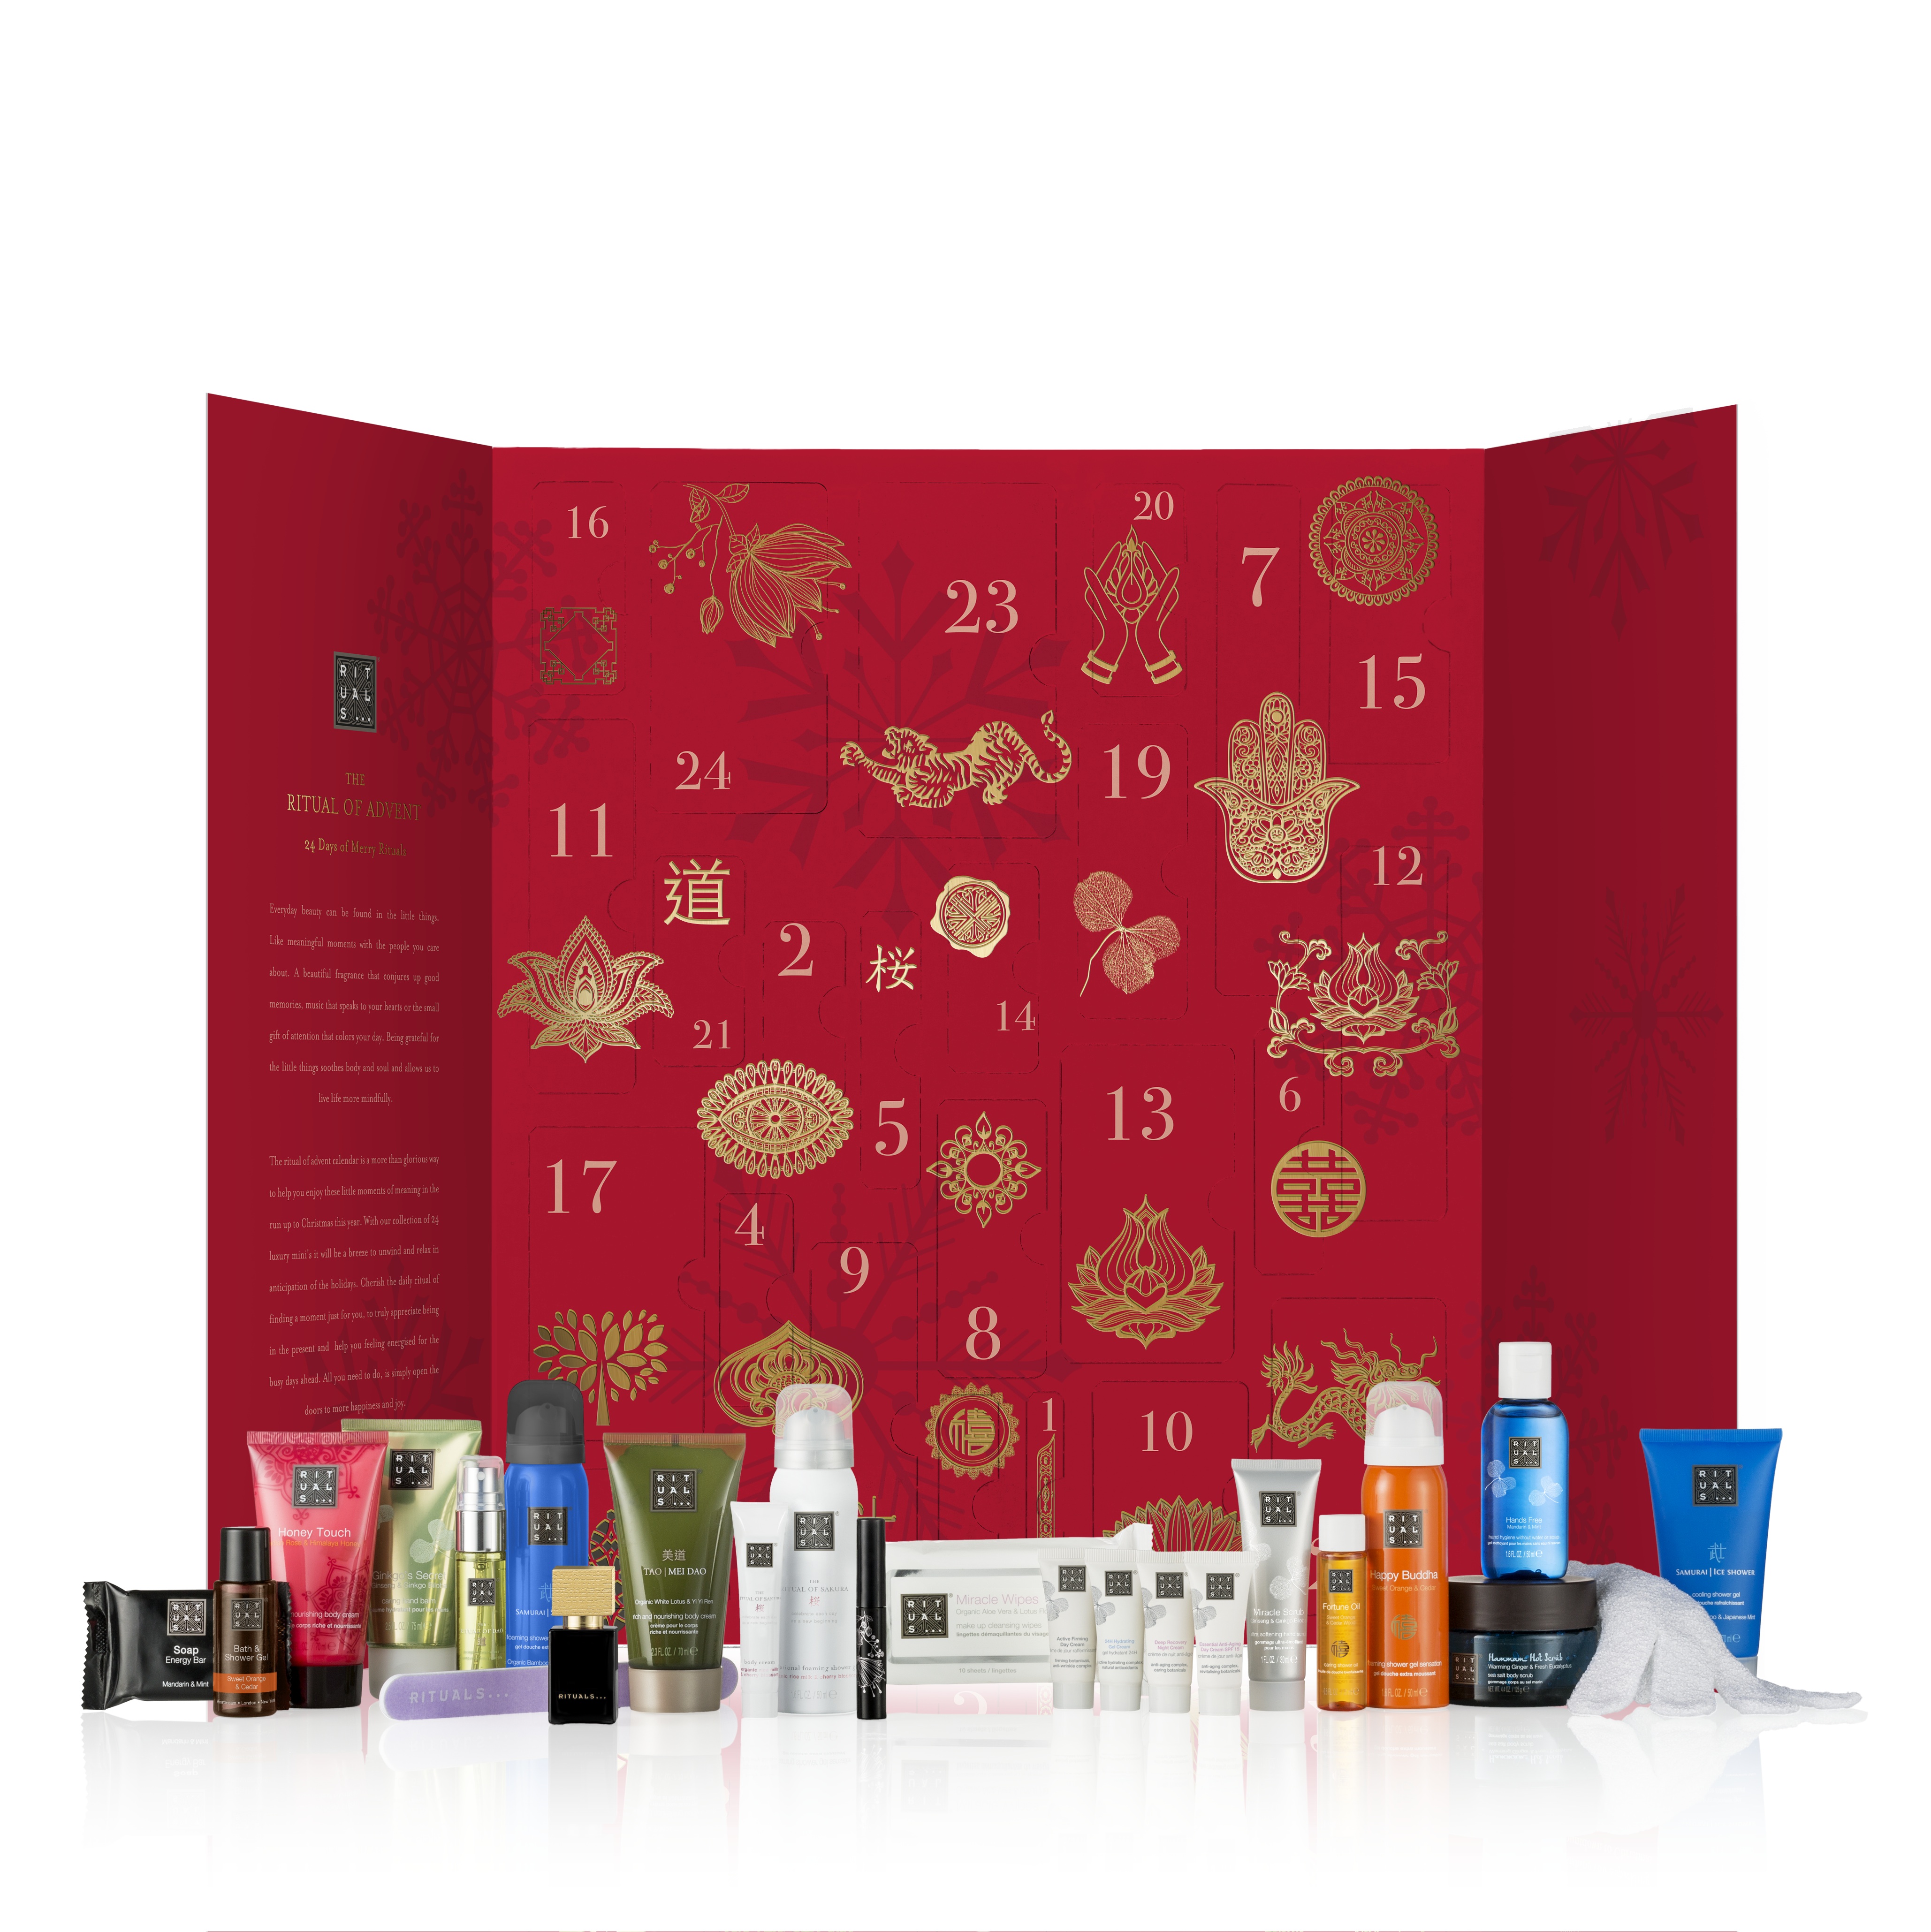 rituals-count-down-to-christmas-box-beauty